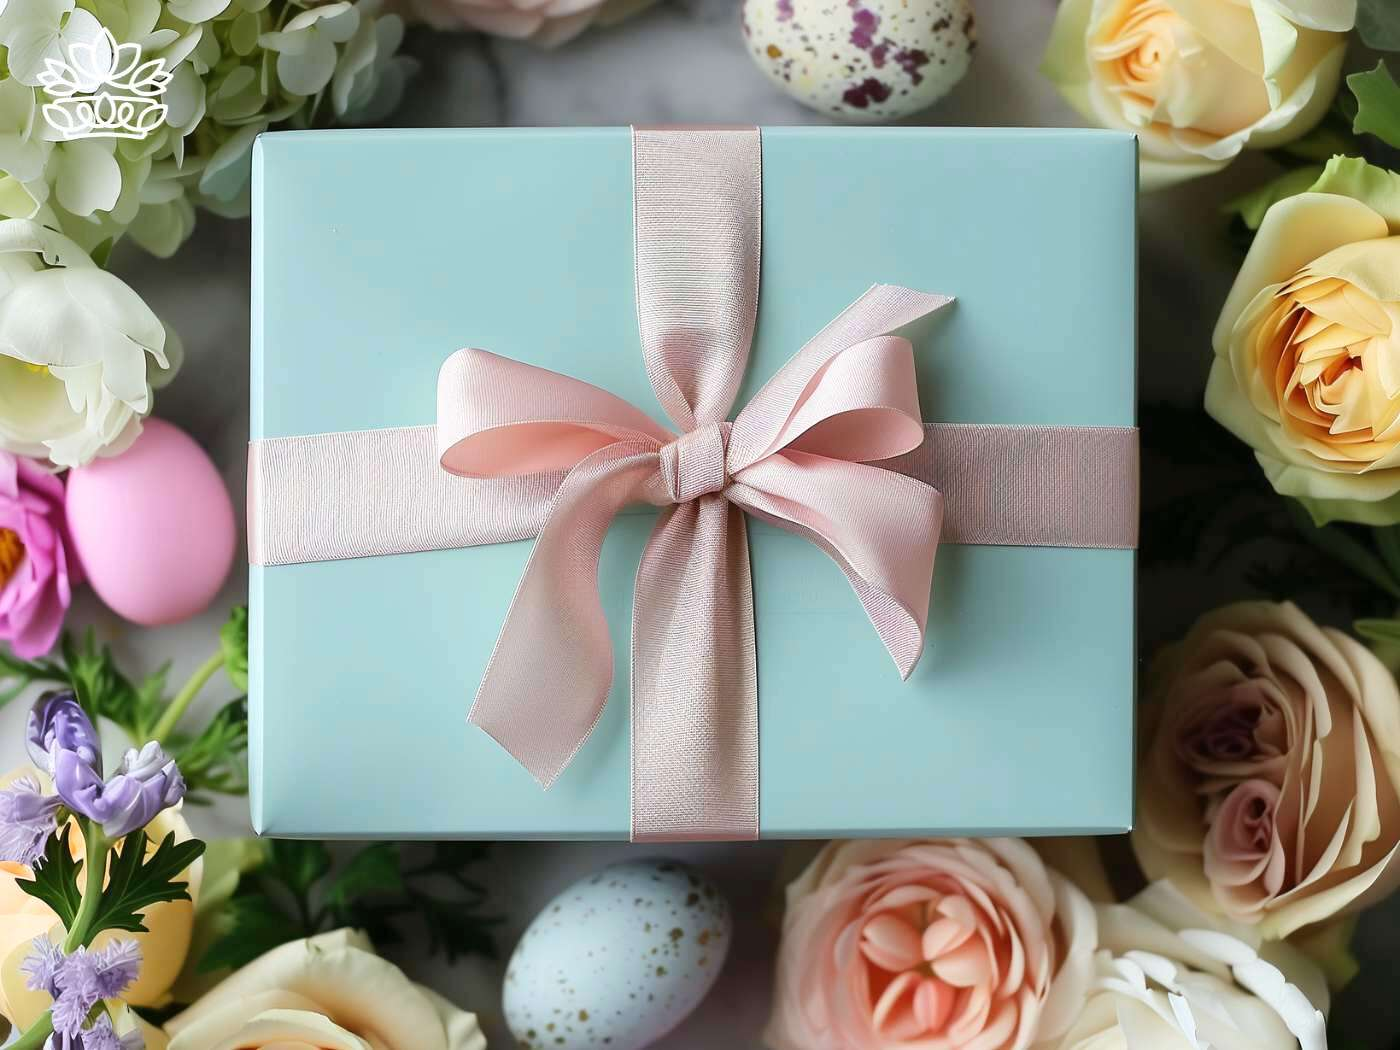 Elegant Easter gift box tied with a soft pink ribbon, surrounded by Easter eggs and flowers, reflecting the spirit of Easter week and the celebration of Jesus Christ, from the Easter Flowers Collection by Fabulous Flowers and Gifts.